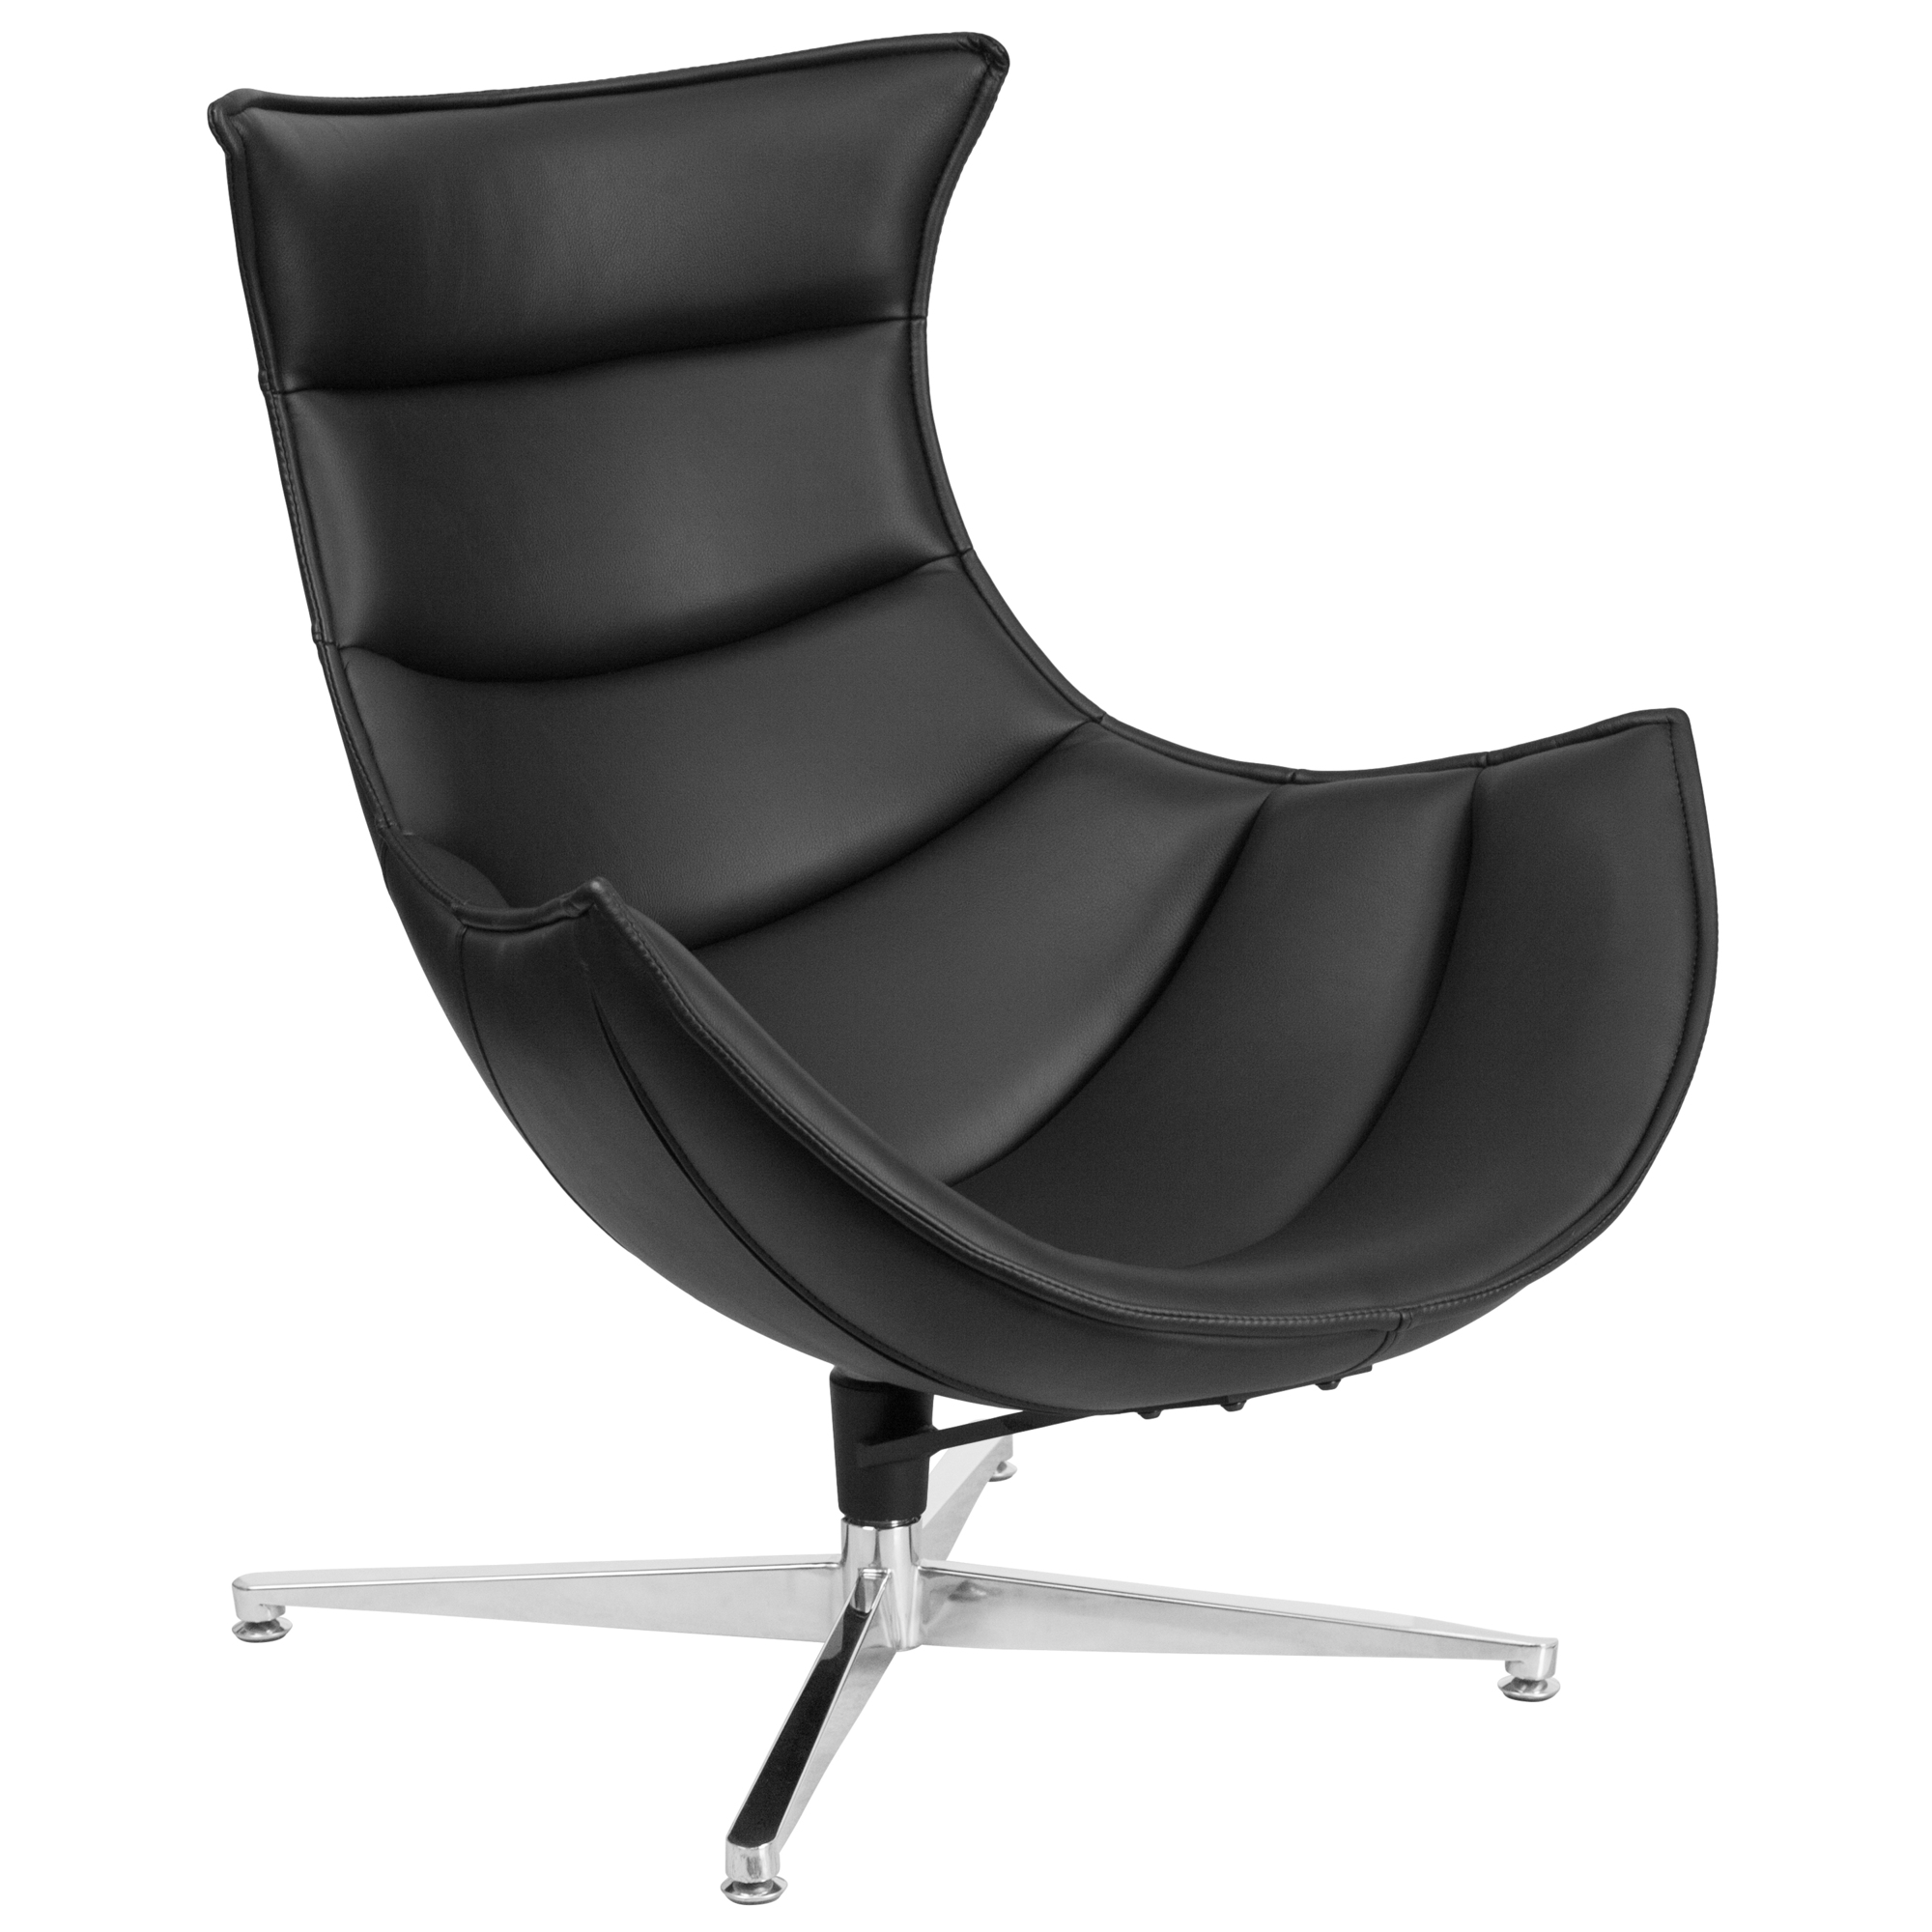 Flash Furniture, Black LeatherSoft Upholstered Swivel Cocoon Chair, Primary Color Black, Included (qty.) 1, Model ZB31